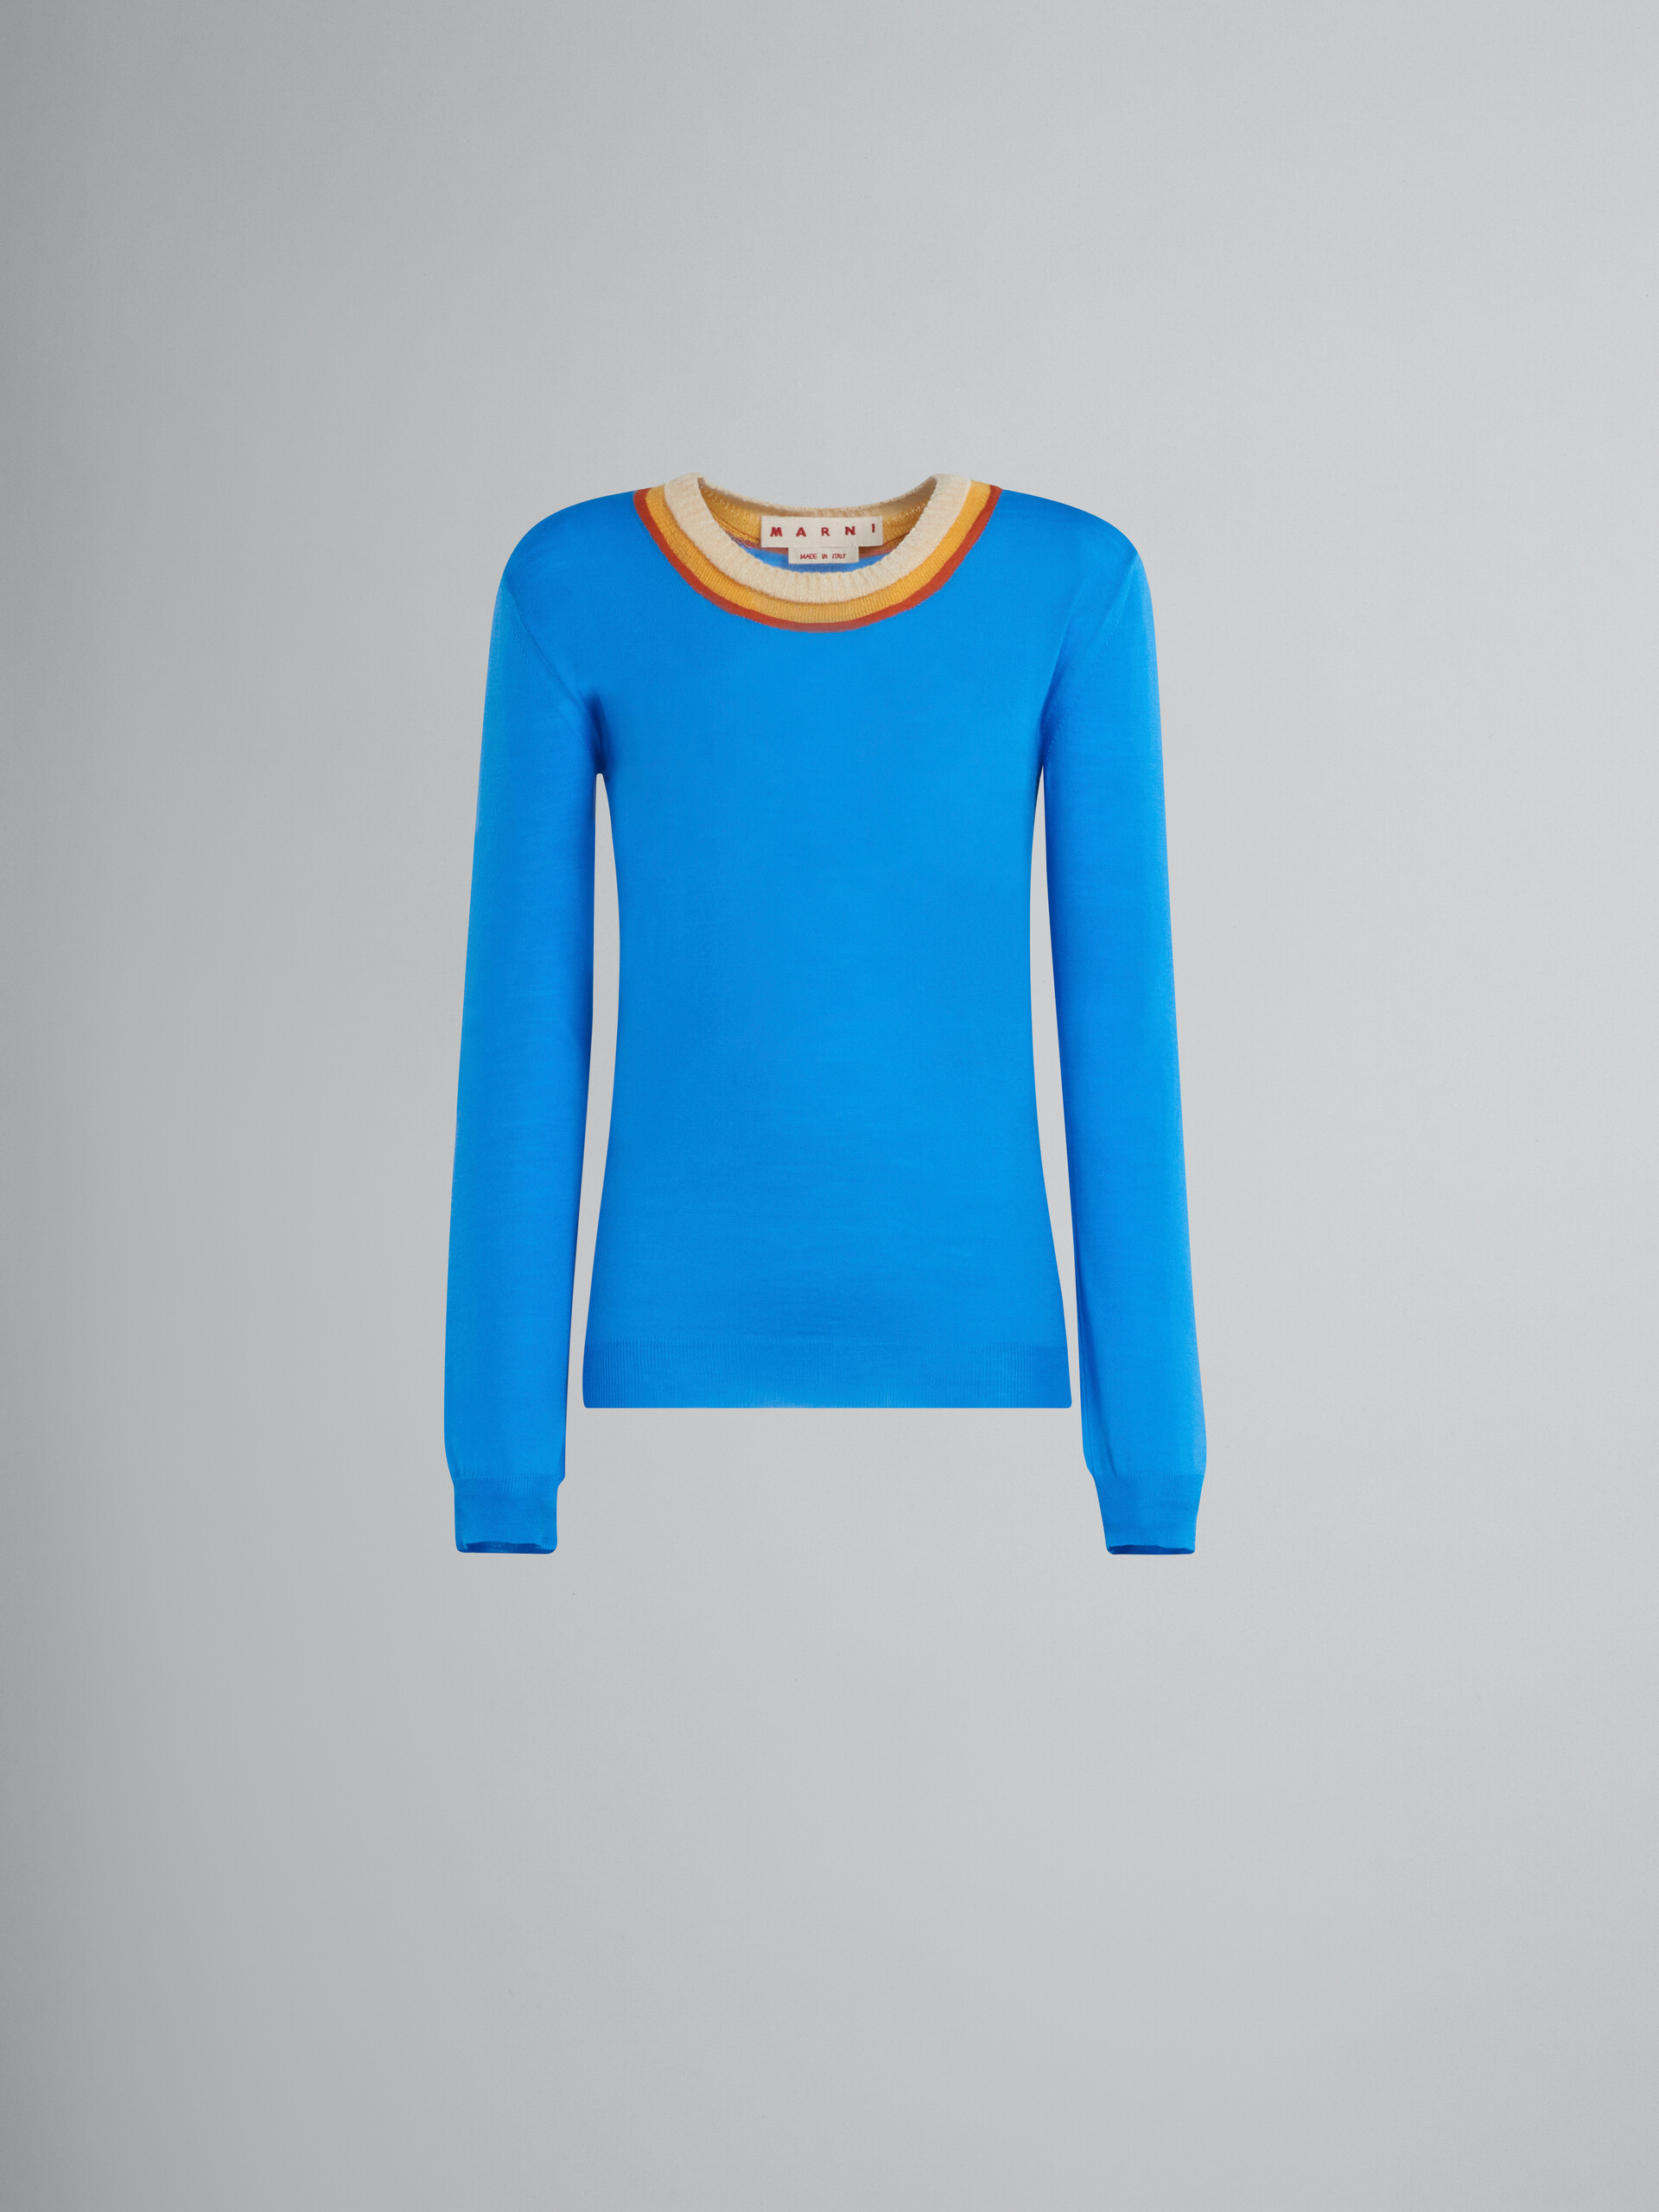 Blue wool jumper with triple neckline - Pullovers - Image 1